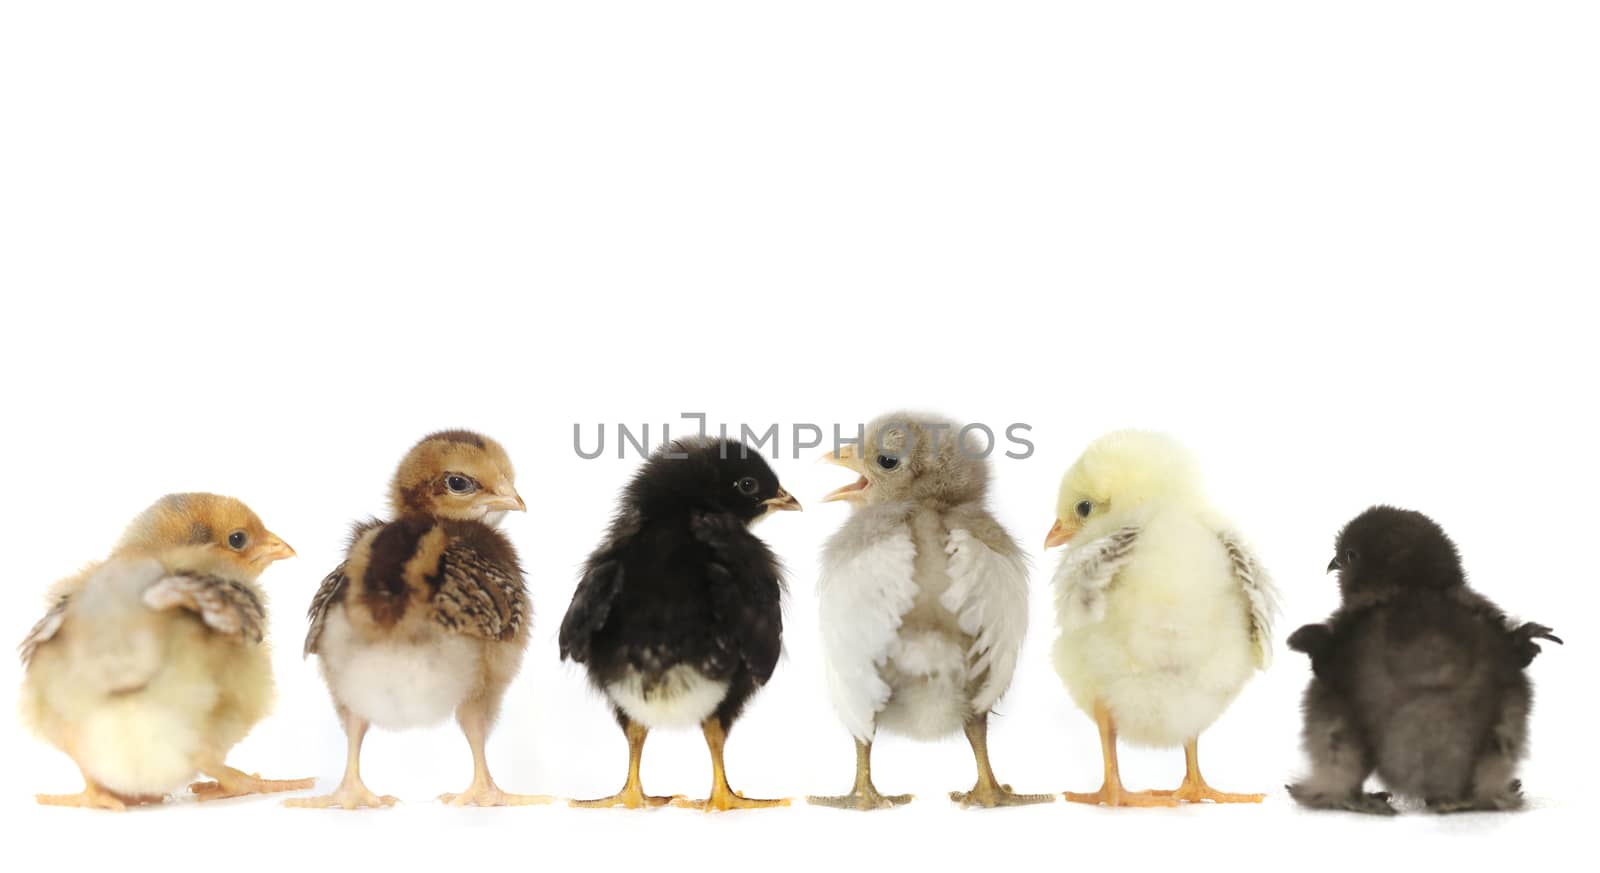 Many Baby Chick Chickens Lined Up on White by tobkatrina